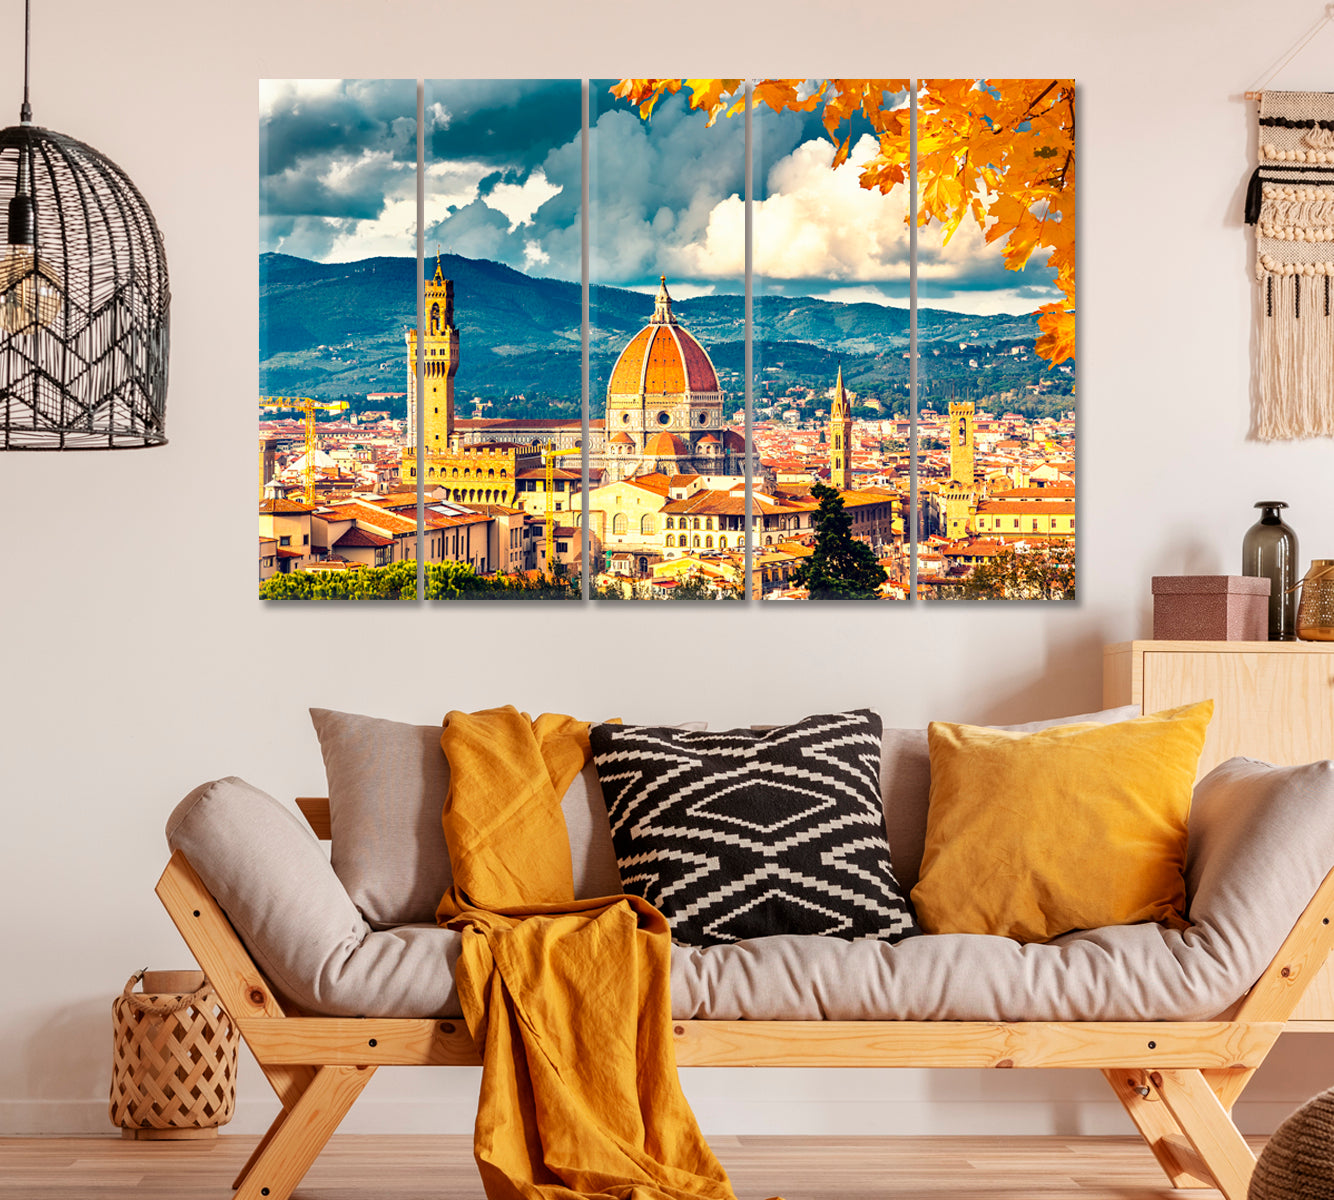 Santa Maria del Fiore Florence Cathedral Italy Canvas Print ArtLexy 5 Panels 36"x24" inches 